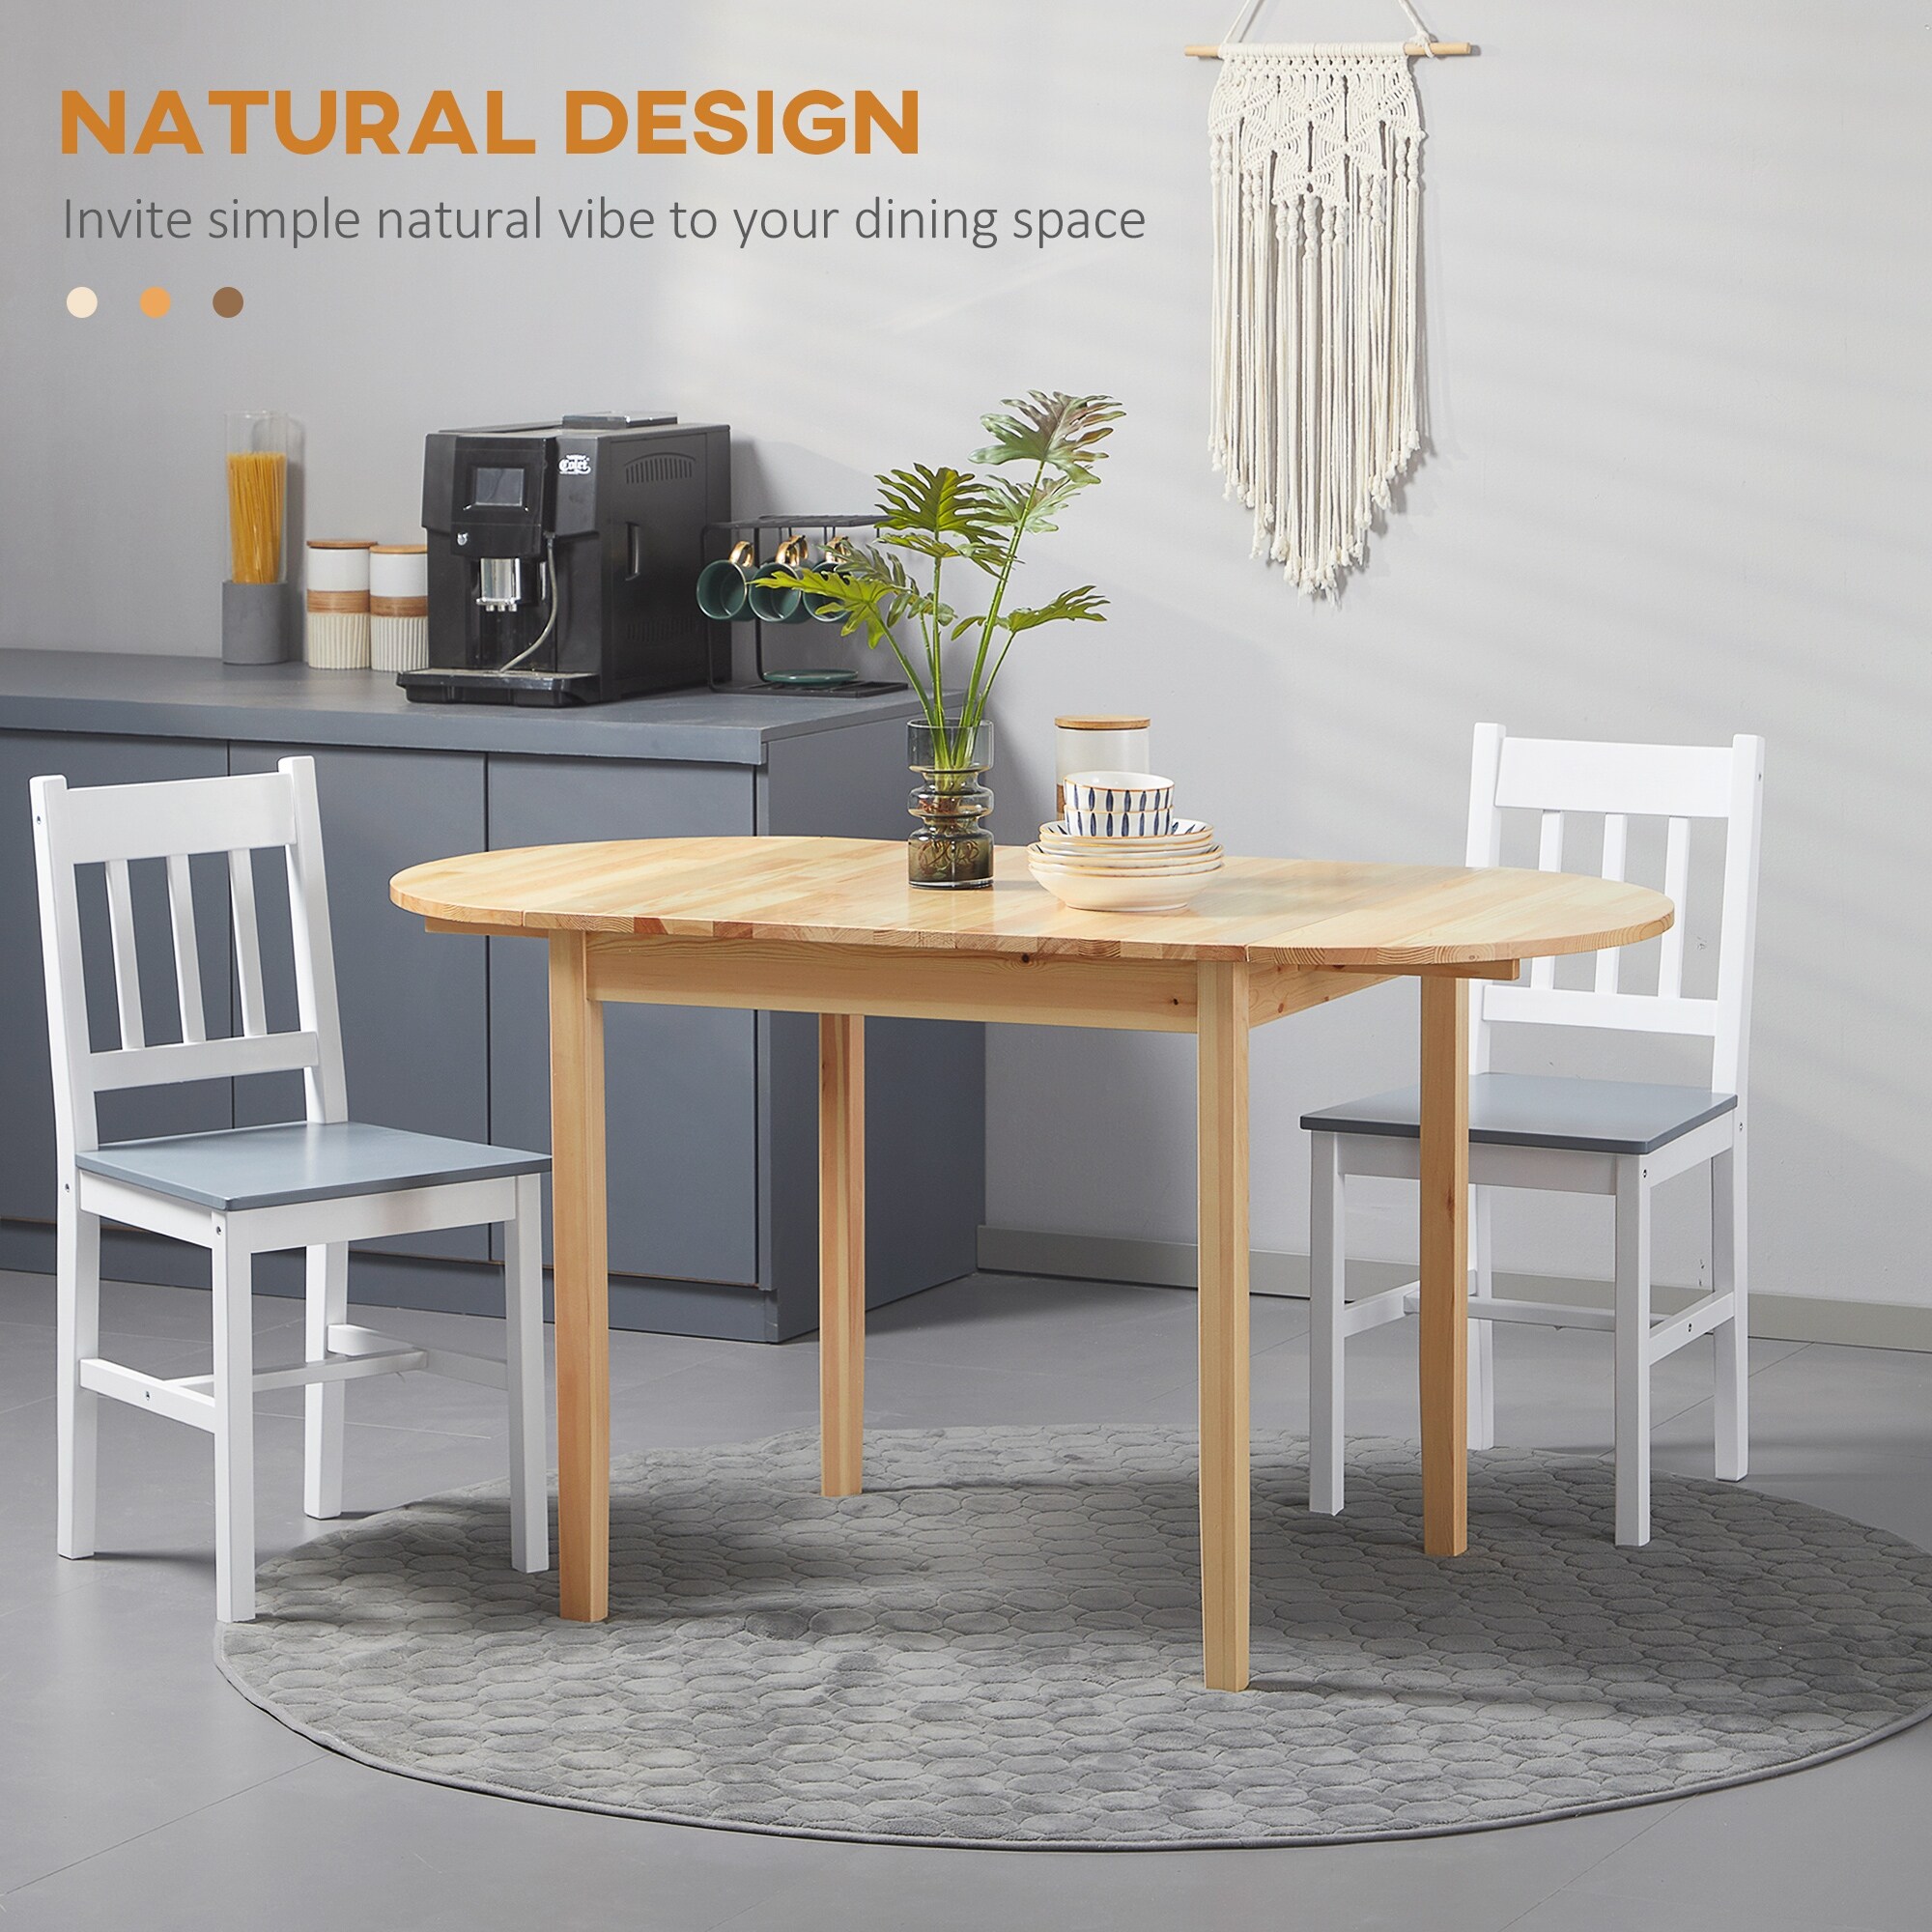 https://ak1.ostkcdn.com/images/products/is/images/direct/91476afd3be3d0f2737aa7728536f10daccf33ea/HOMCOM-55%22-Solid-Wood-Kitchen-Table%2C-Drop-Leaf-Tables-for-Small-Spaces%2C-Folding-Dining-Table.jpg